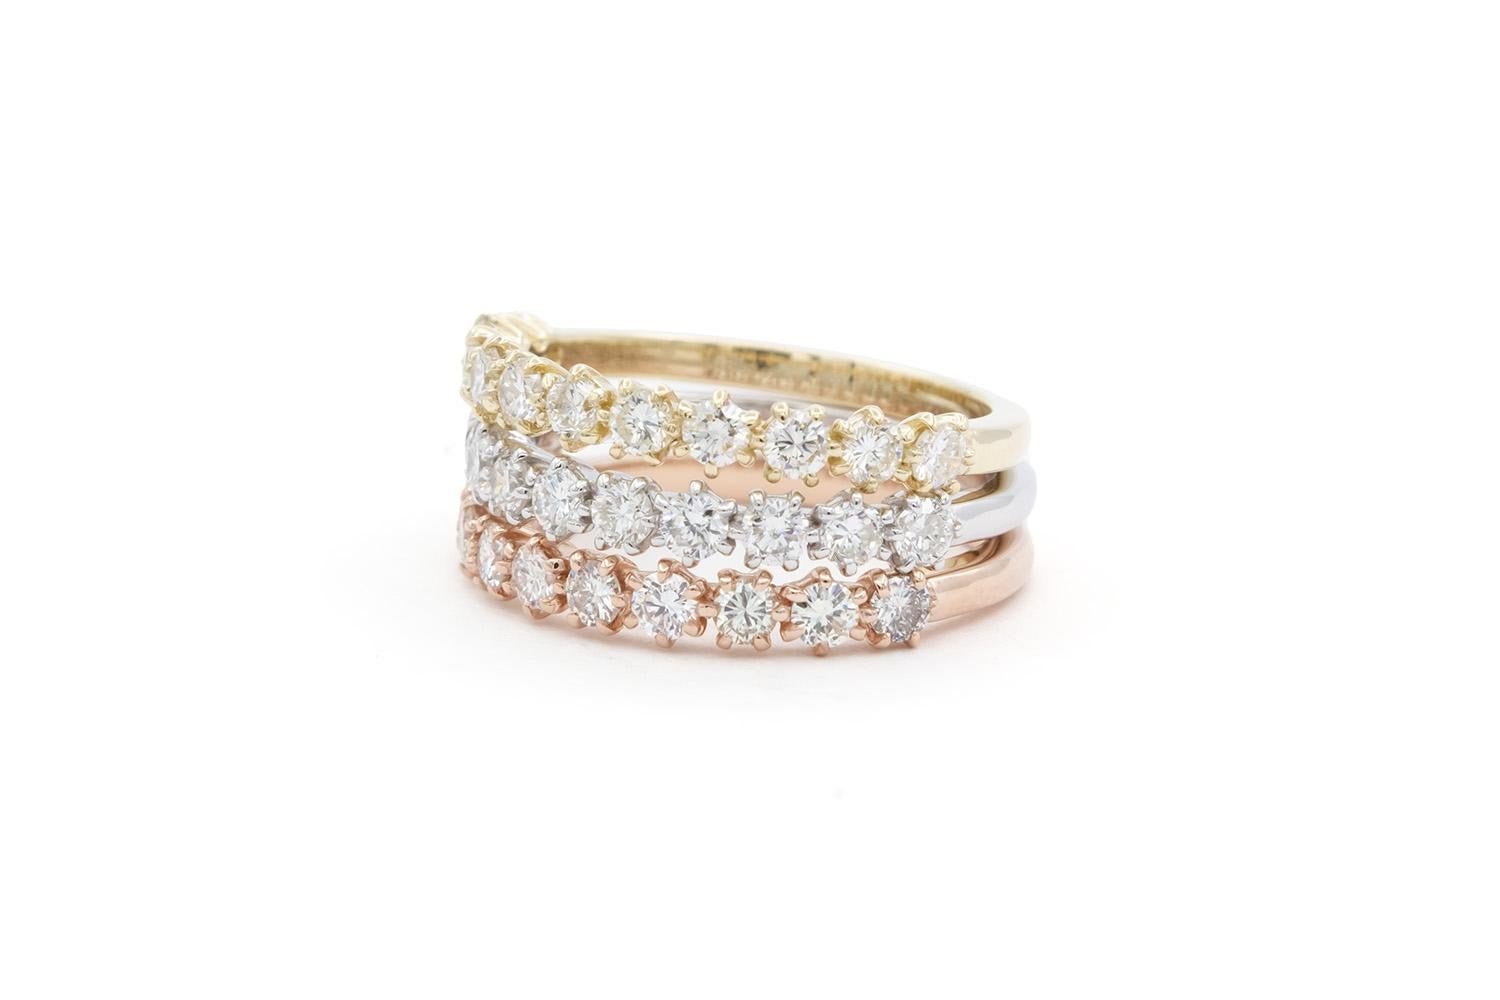 14k White Yellow & Rose Gold Diamond Stacking Fashion Rings 1.55ctw G-H/VS-SI In New Condition For Sale In Tustin, CA